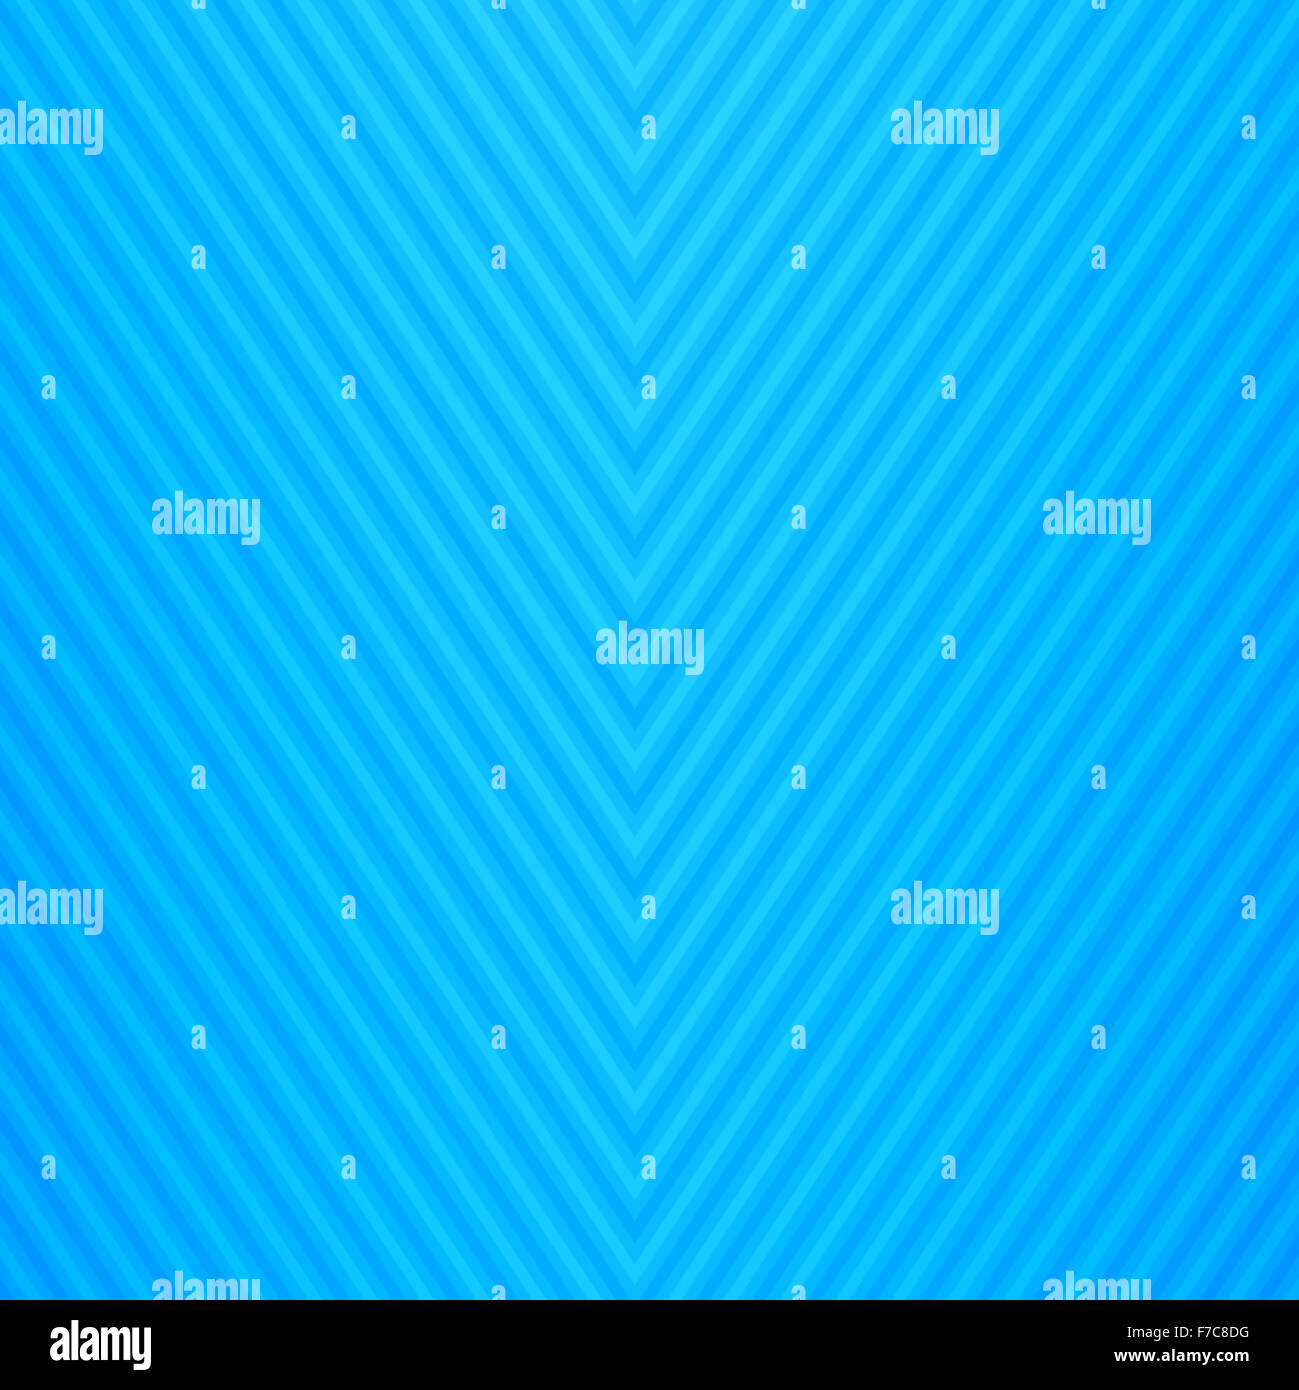 Abstract blue straight lines background geometric pattern Stock Photo